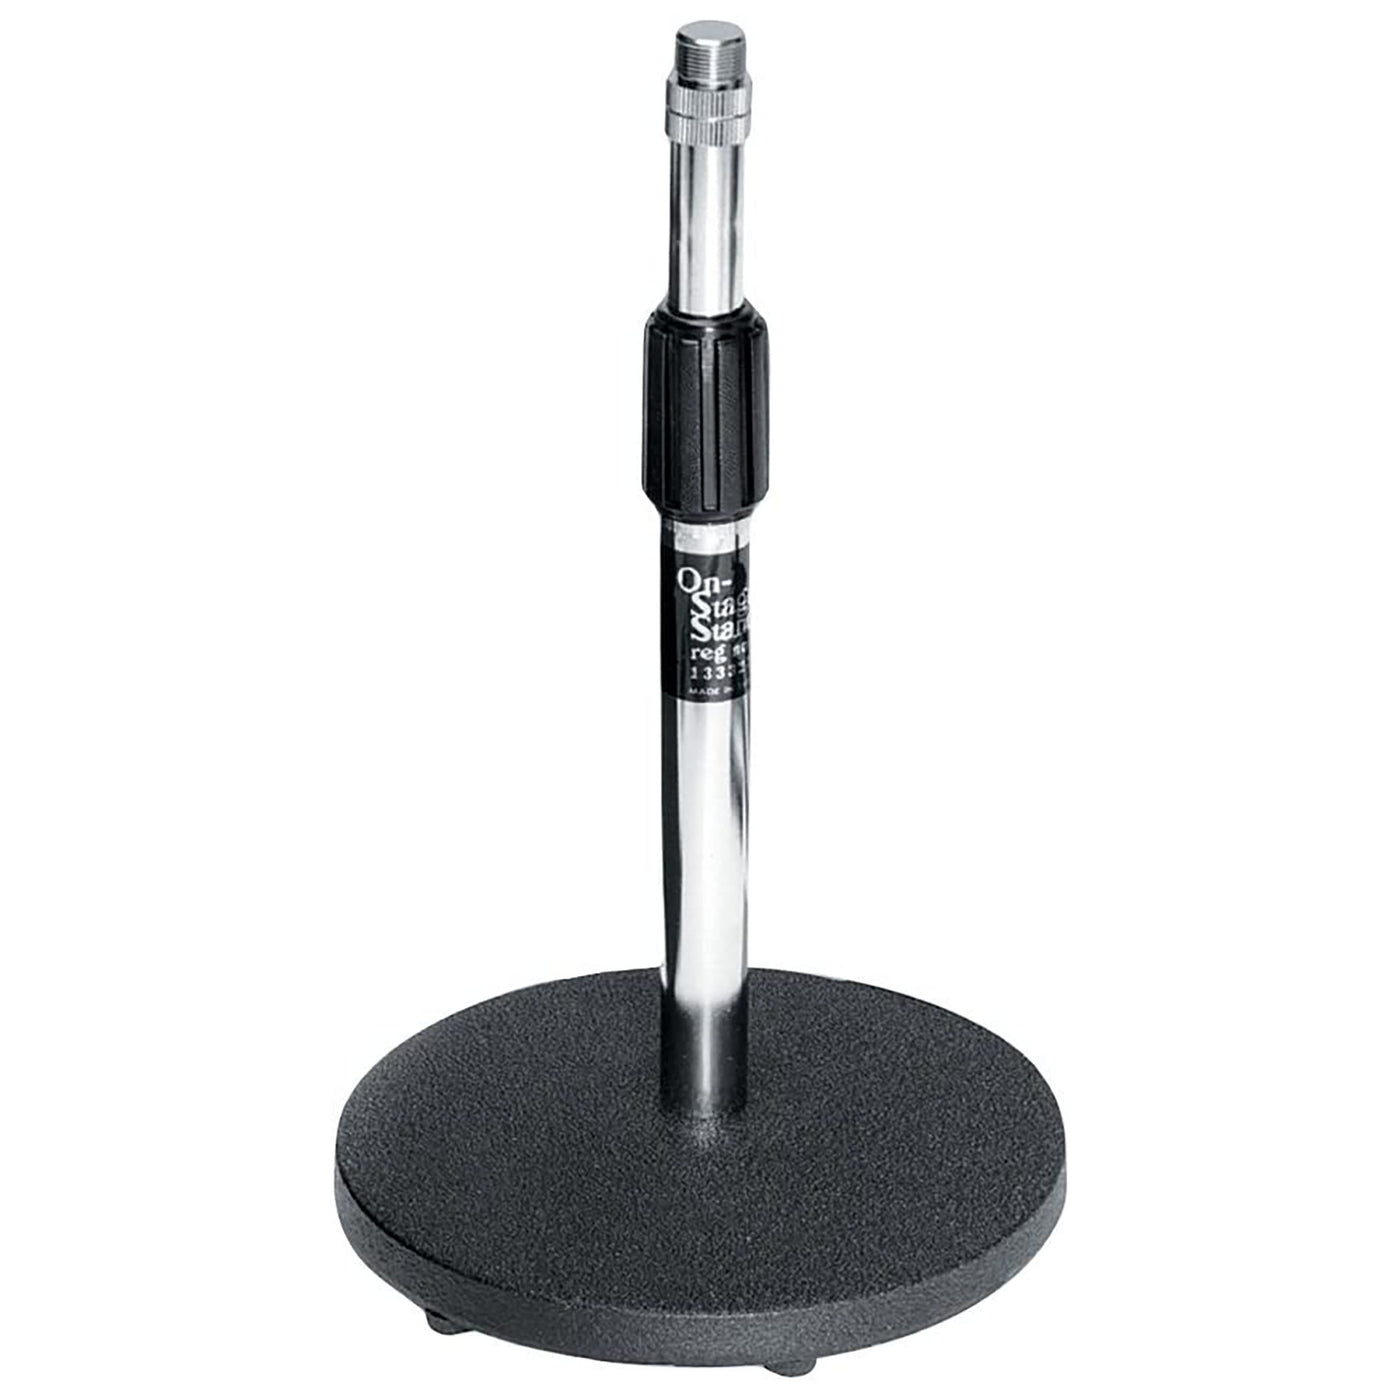 On-Stage Stands DS7200C Adjustable Desktop Microphone Stand, Chrome